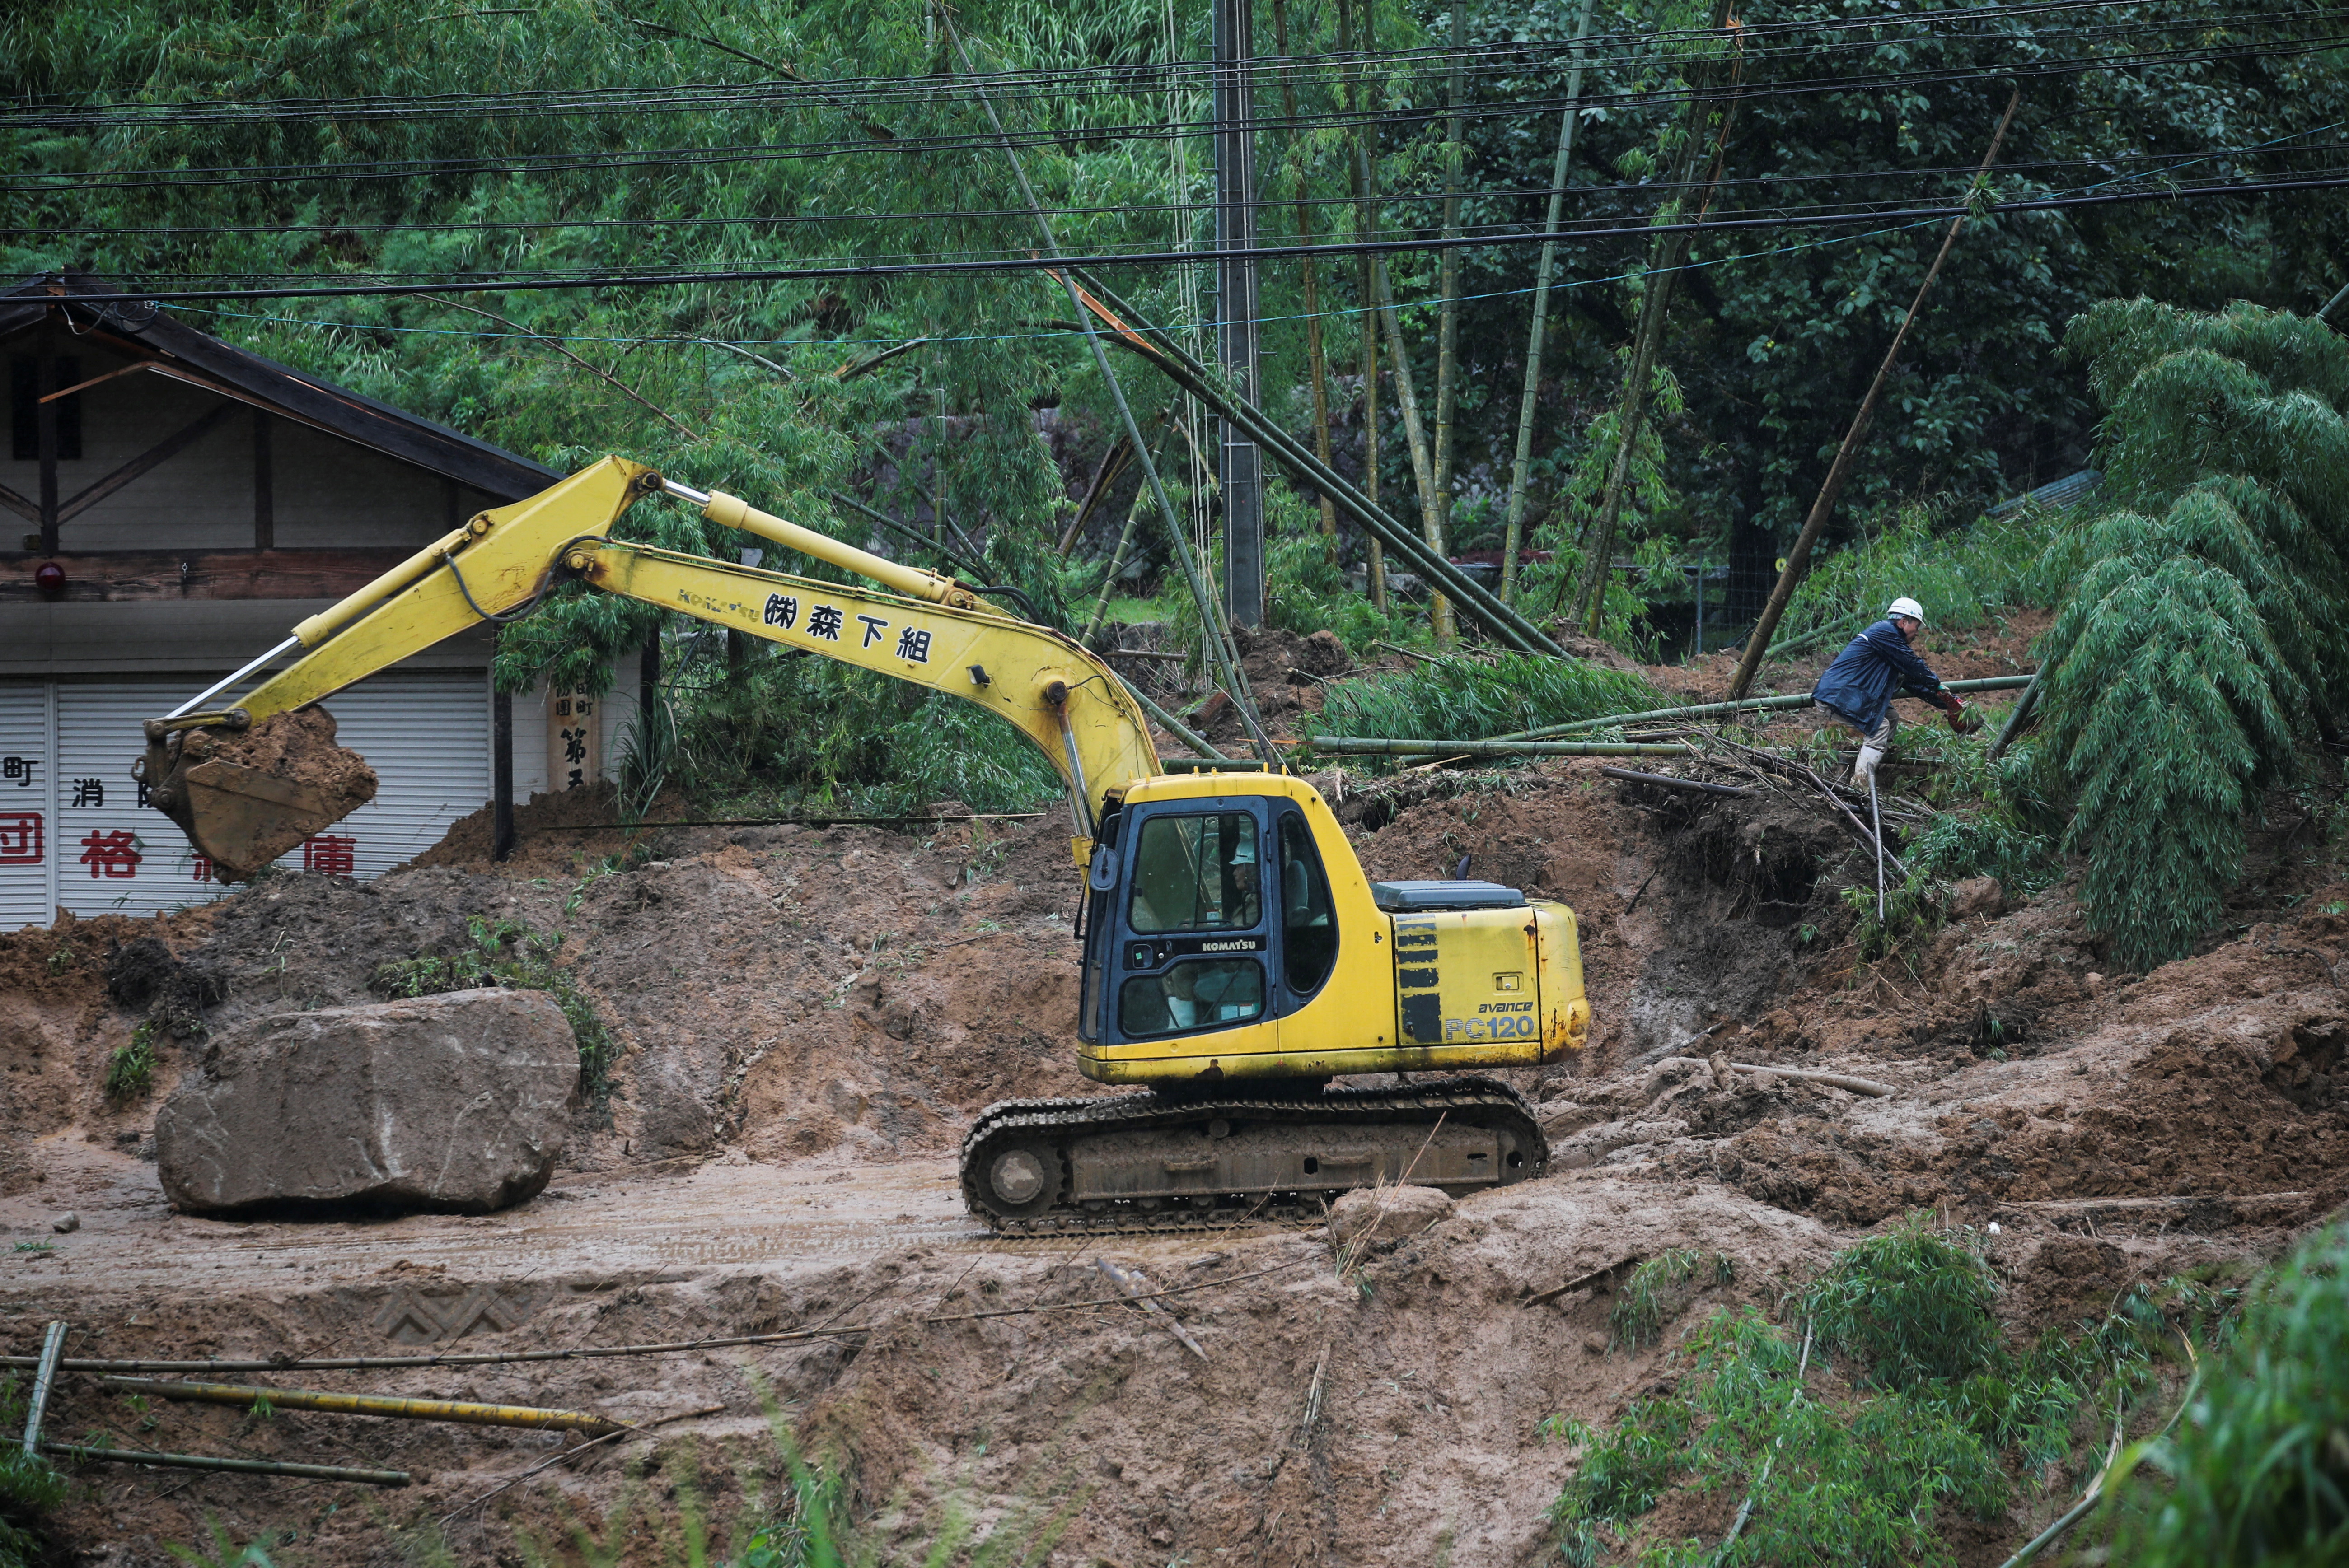 Workers clear a site where a landslide left a 75-year-old woman injured after heavy rain in Soeda